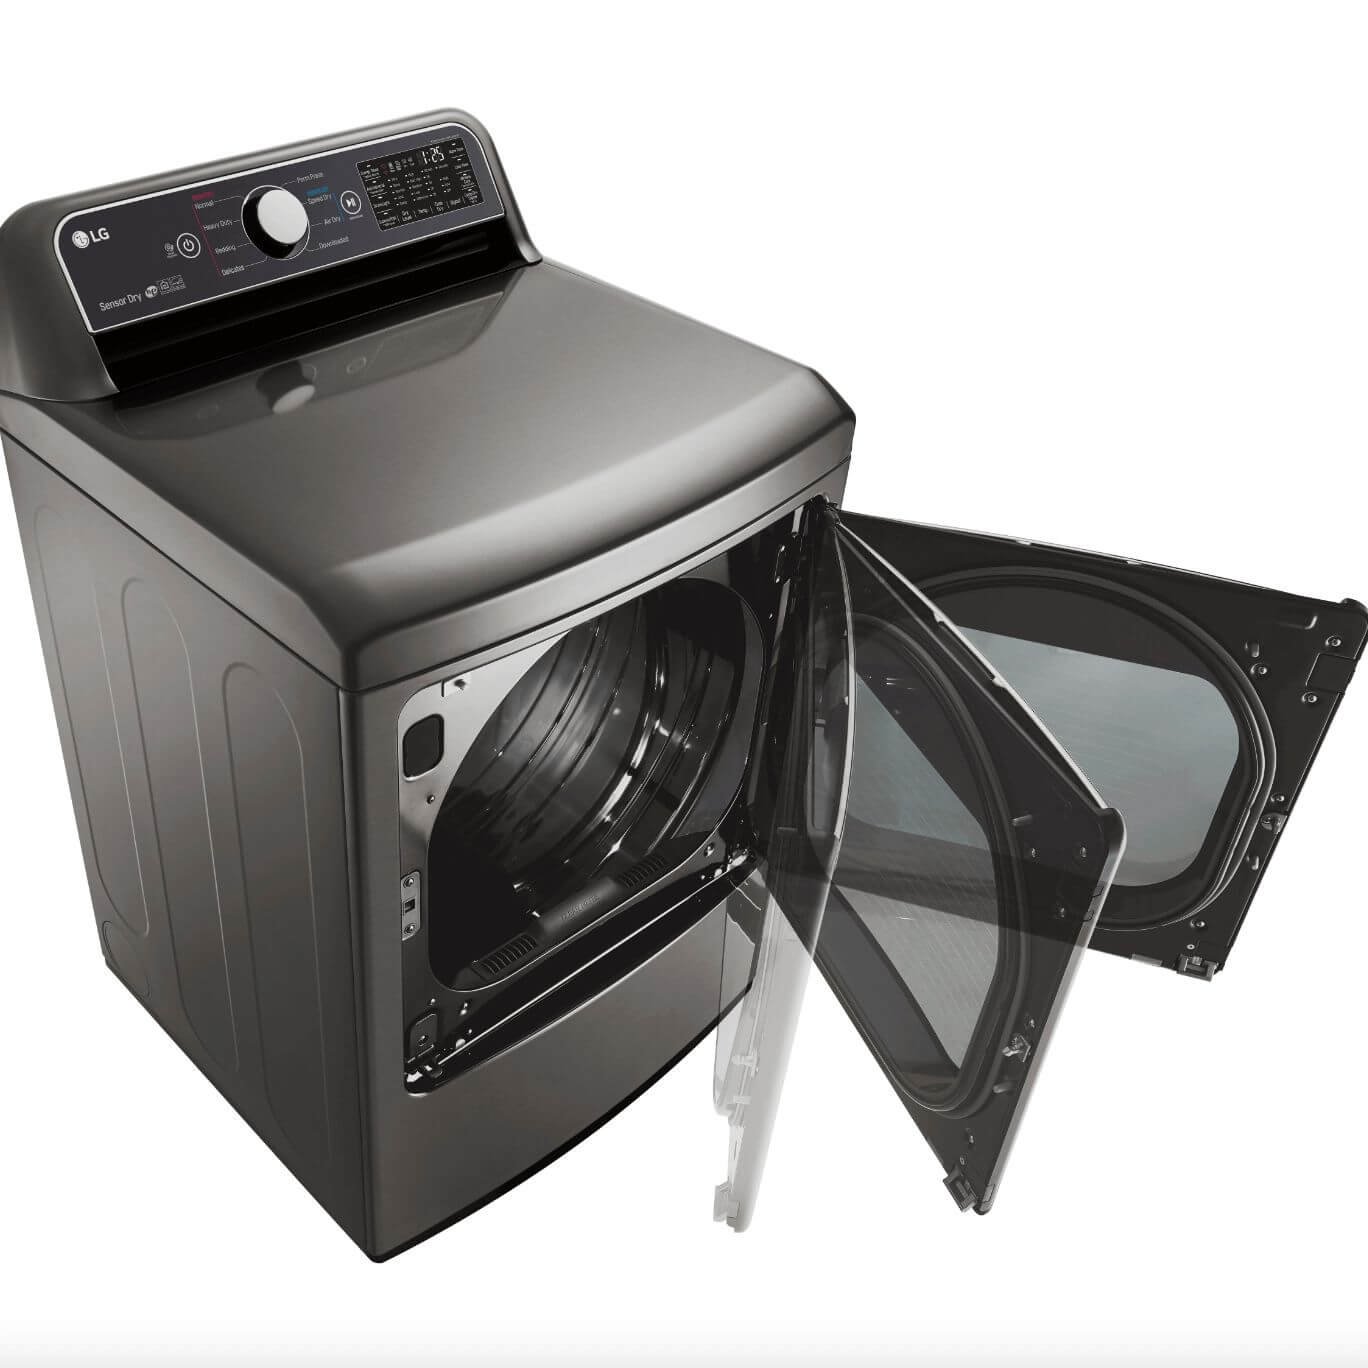 LG 27 Inch Rear Control Front Load Gas Dryer in Graphite Steel 7.3 cu. ft. (DLG7301VE)